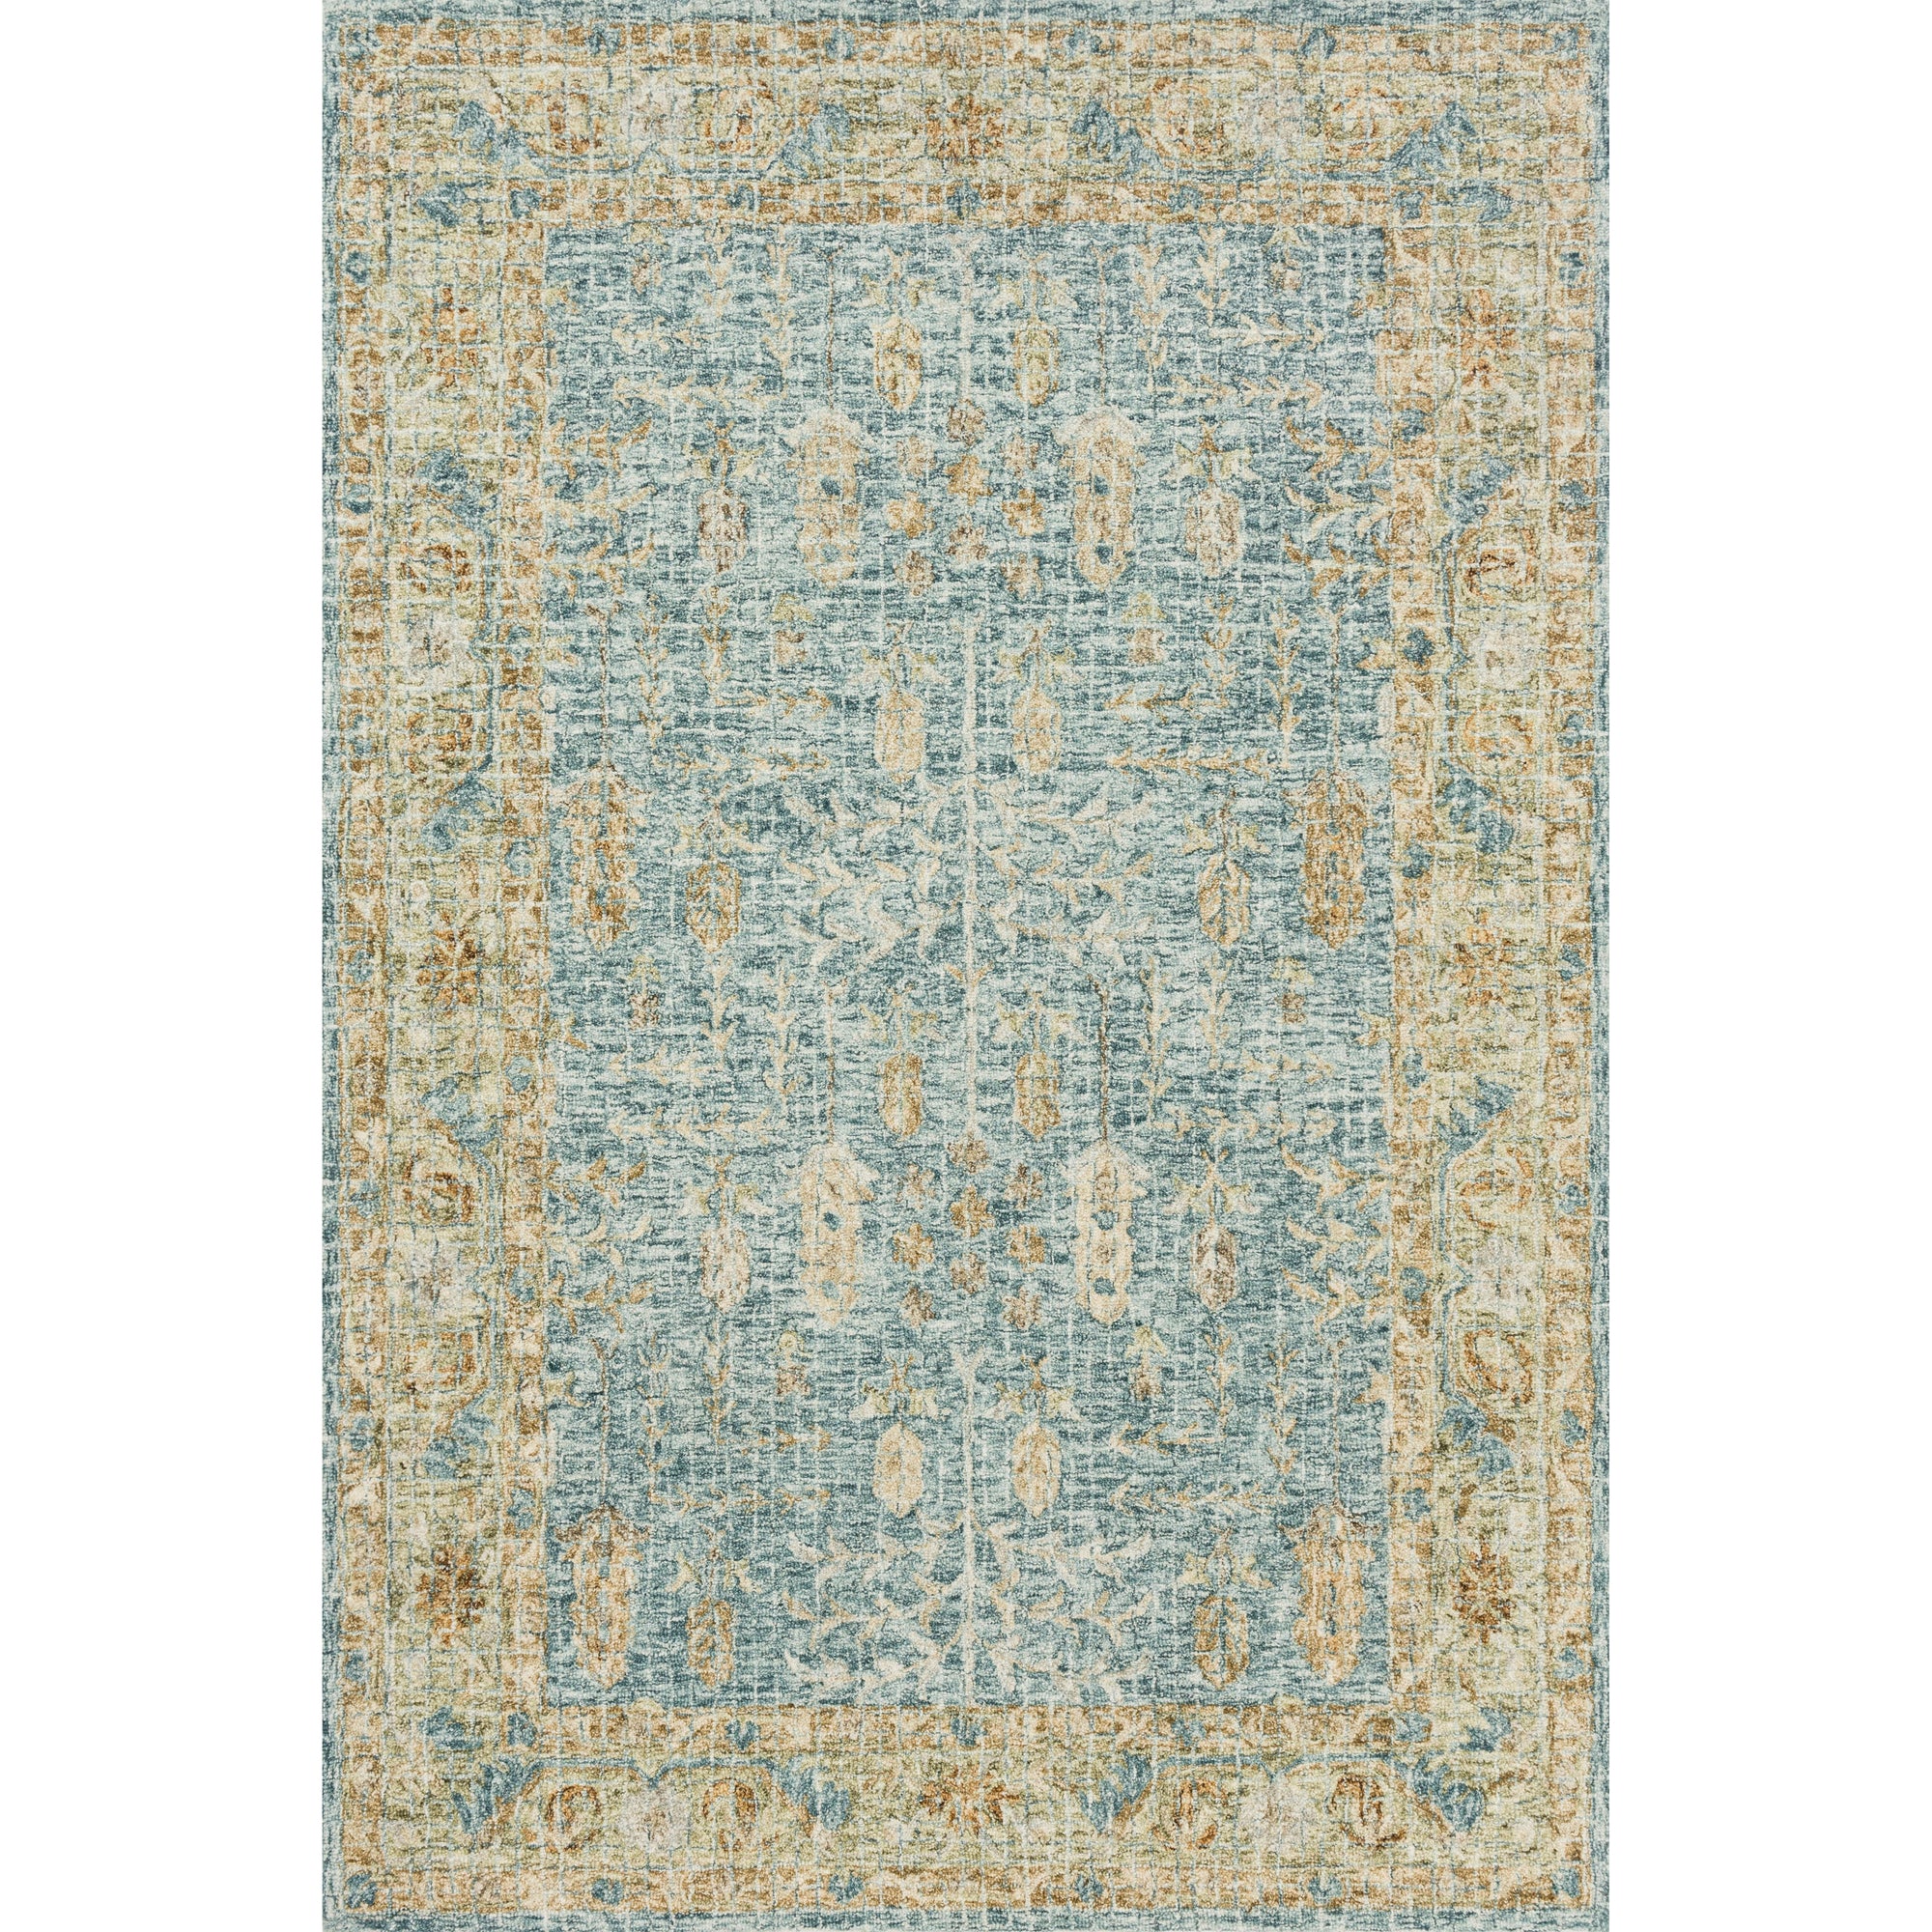 Rugs by Roo Loloi Julian Blue Gold Area Rug in size 18" x 18" Sample